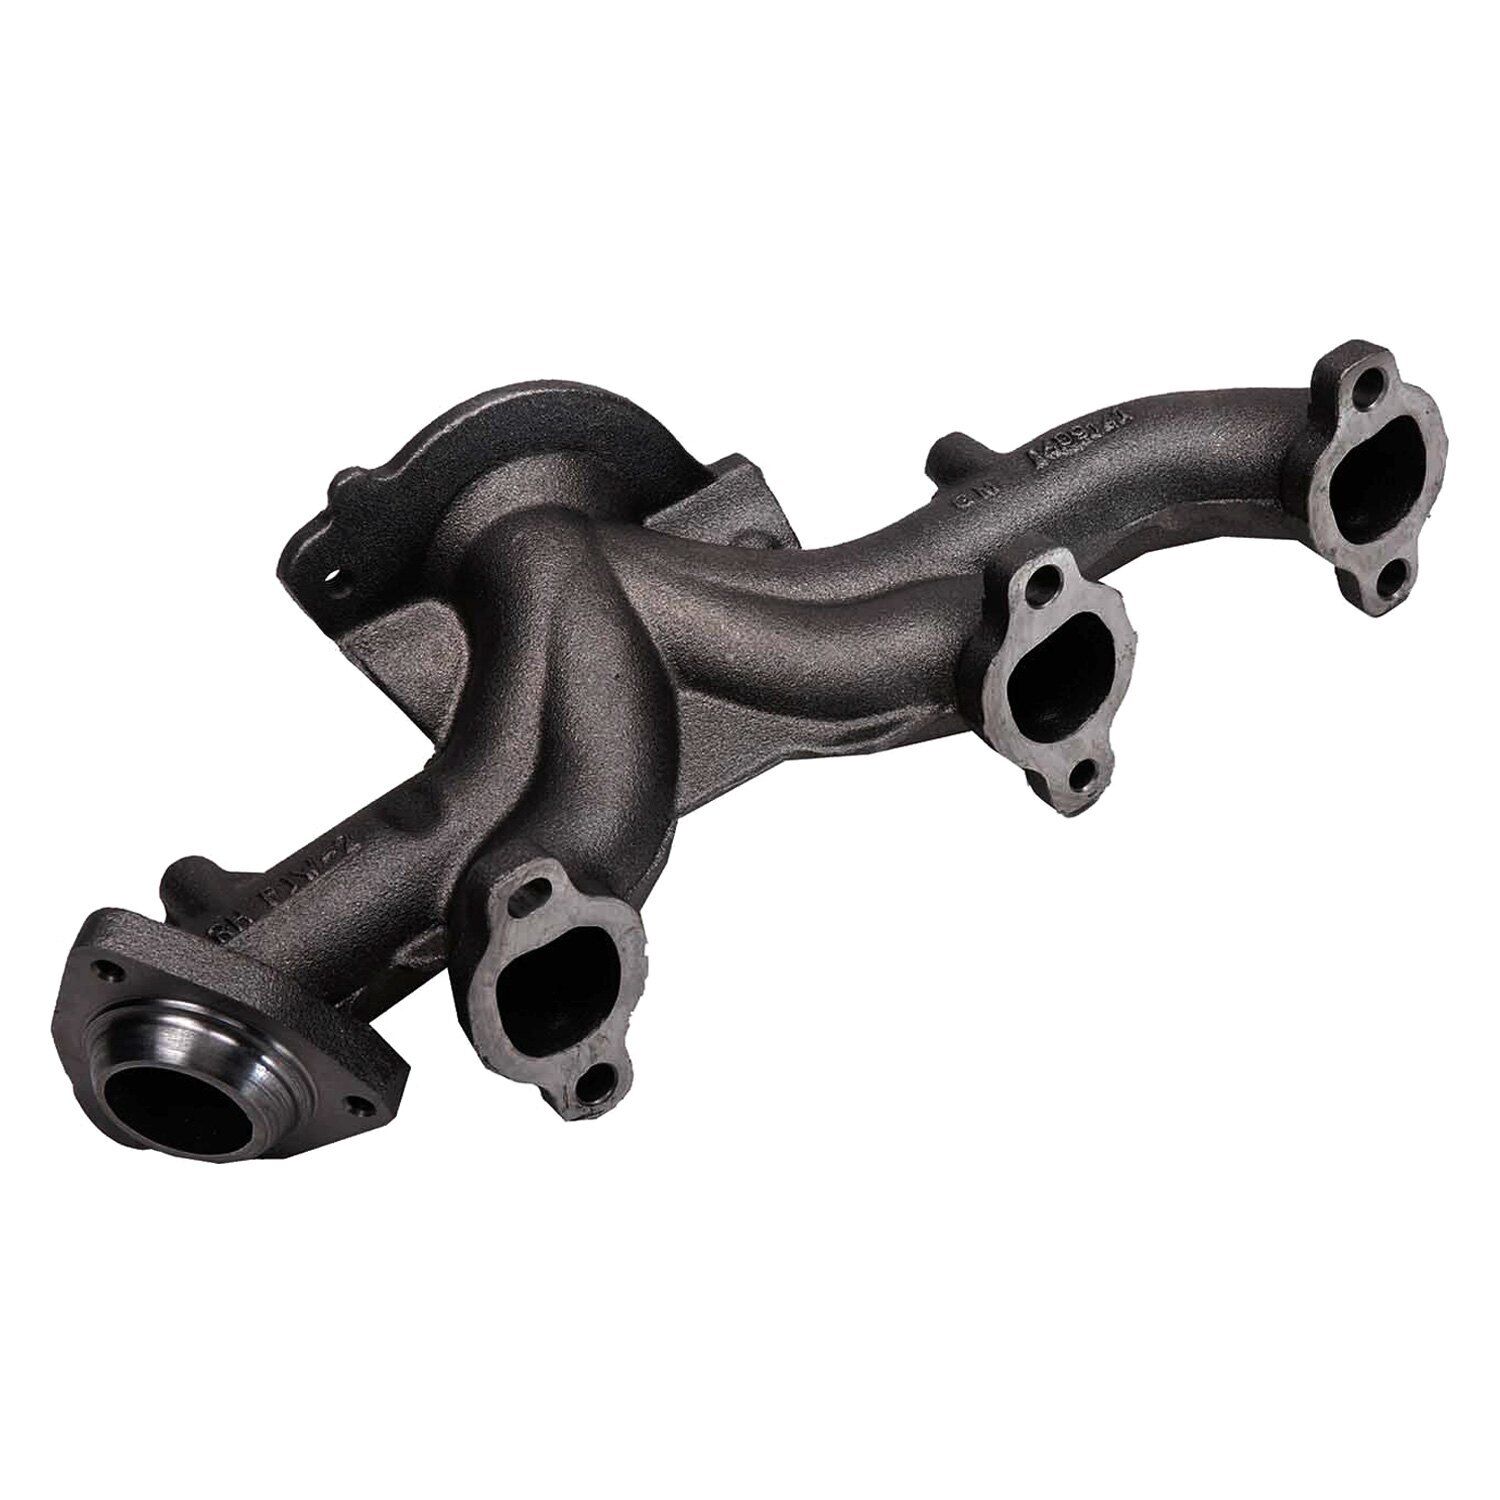 For Chevy Equinox 05-09 ACDelco Genuine GM Parts Cast Iron Exhaust Manifold